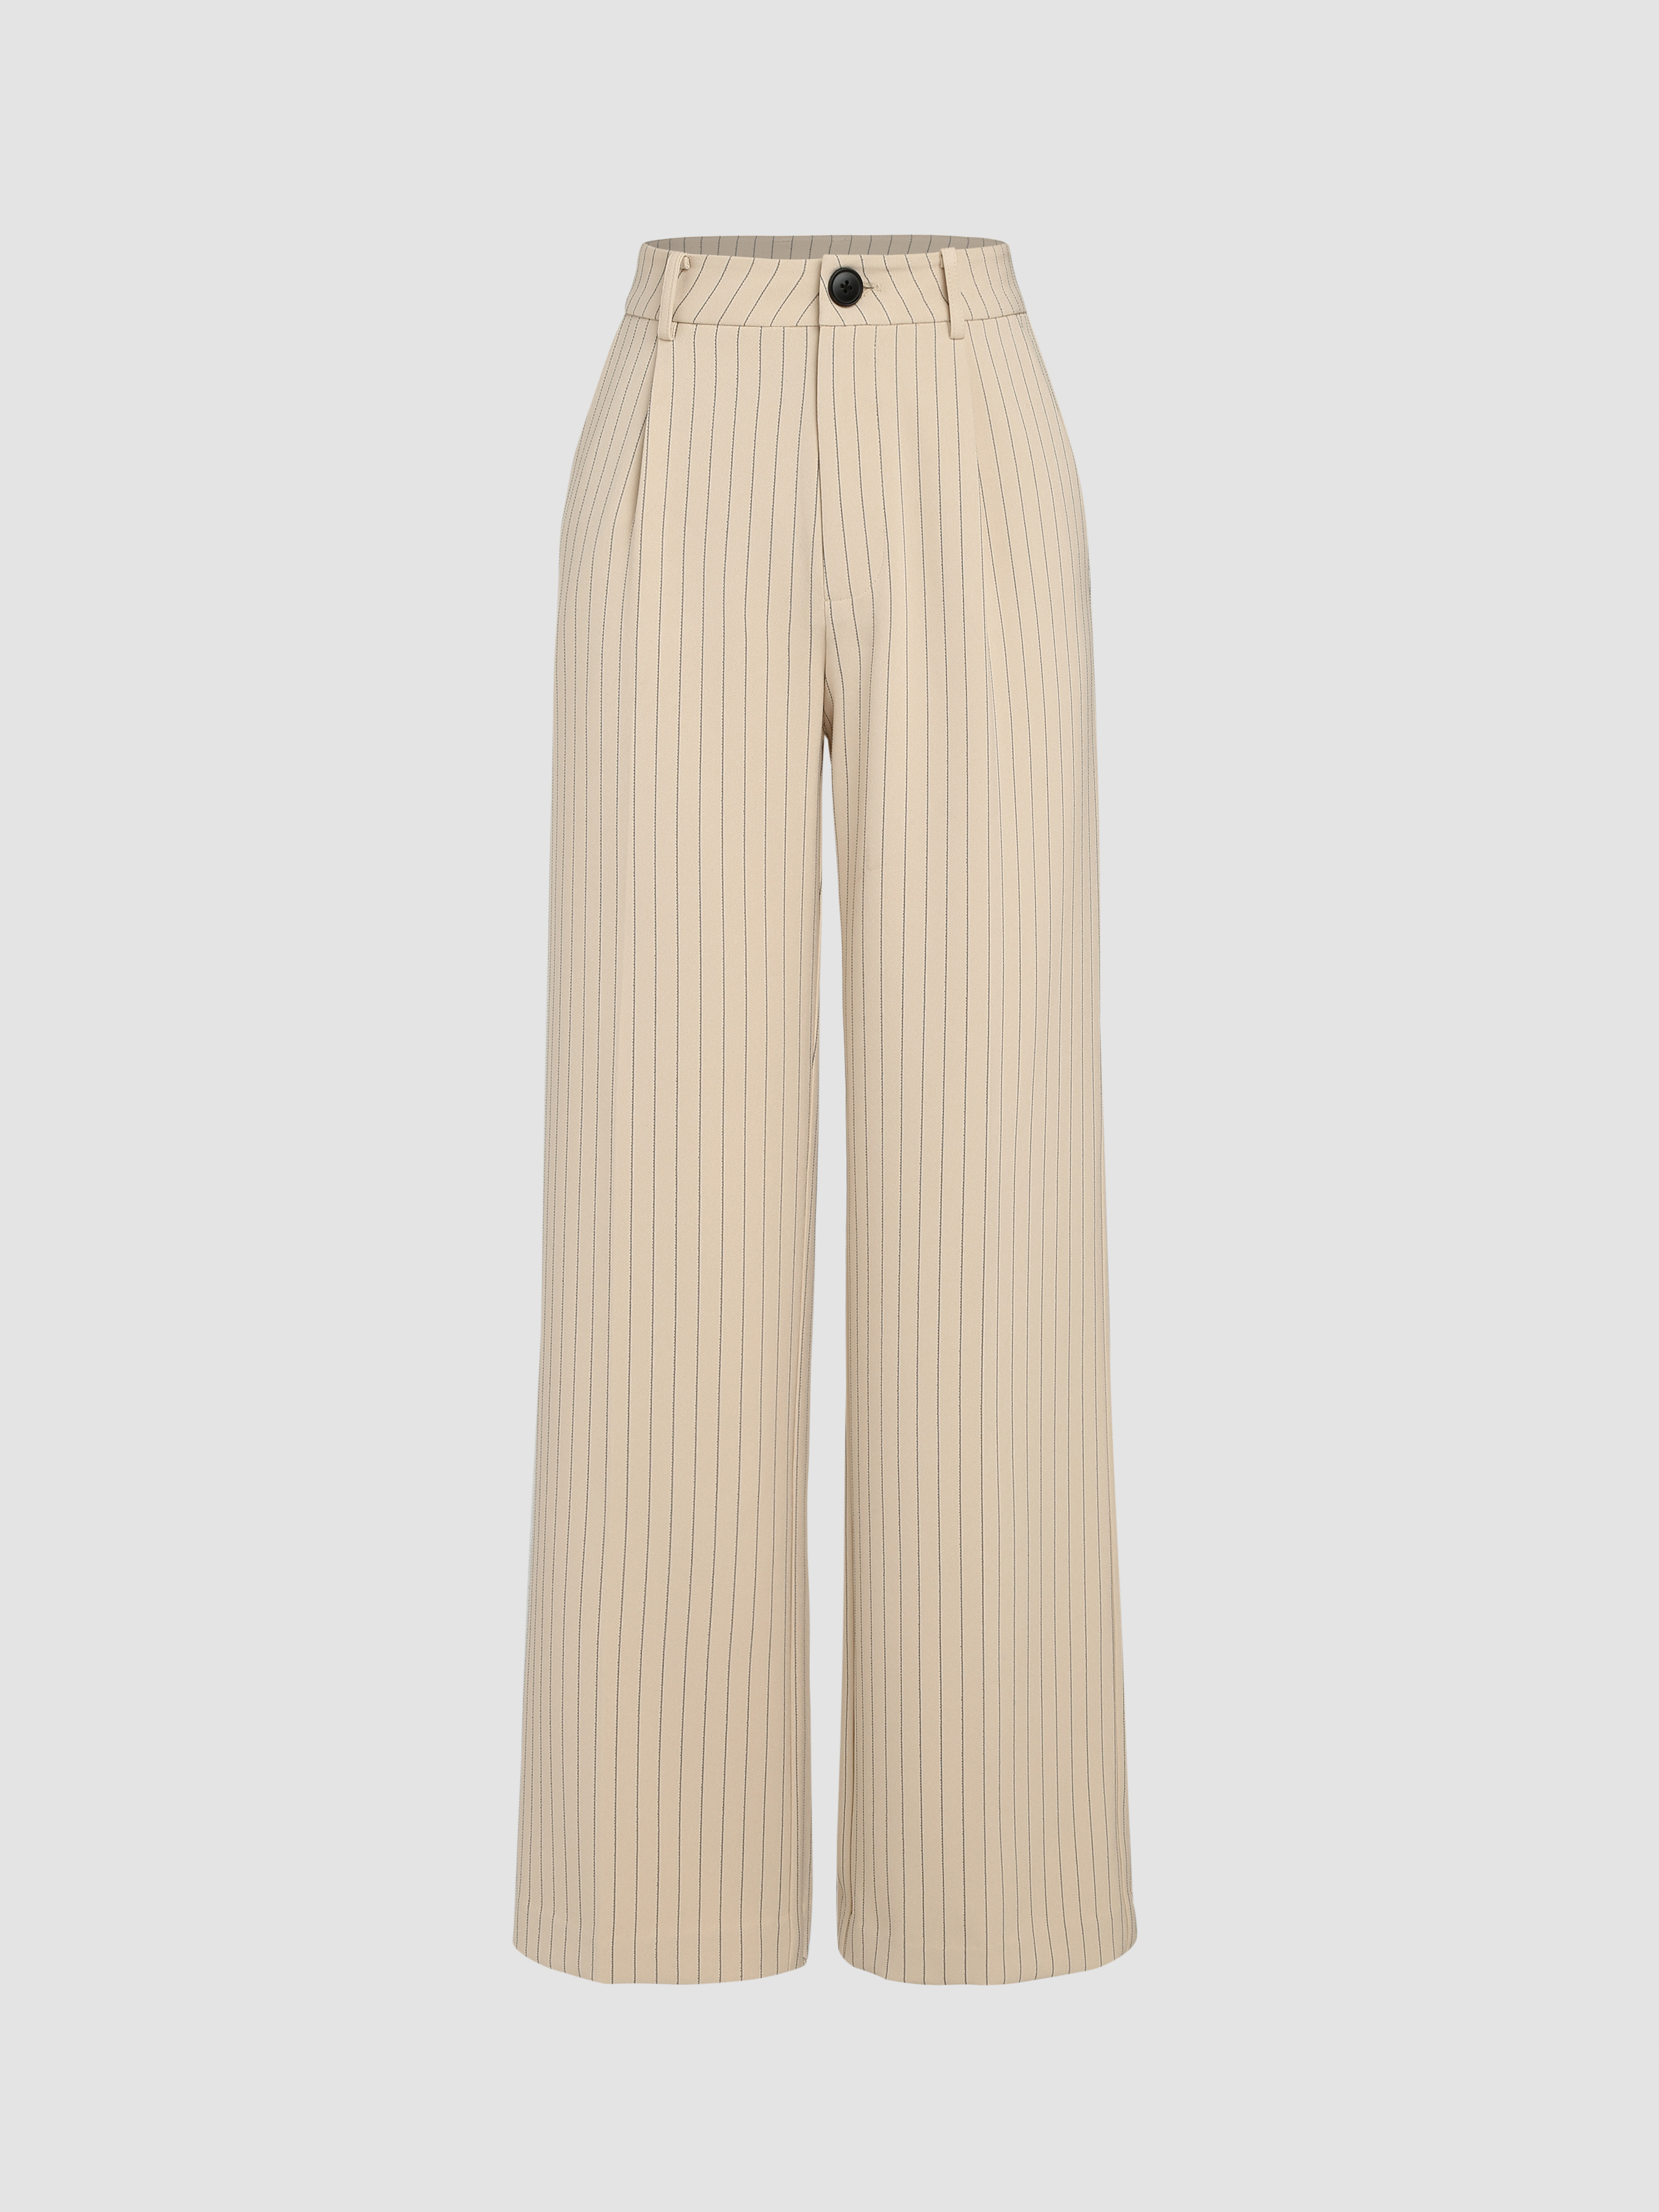 Solid Woven Striped Wide Leg Trousers - Cider